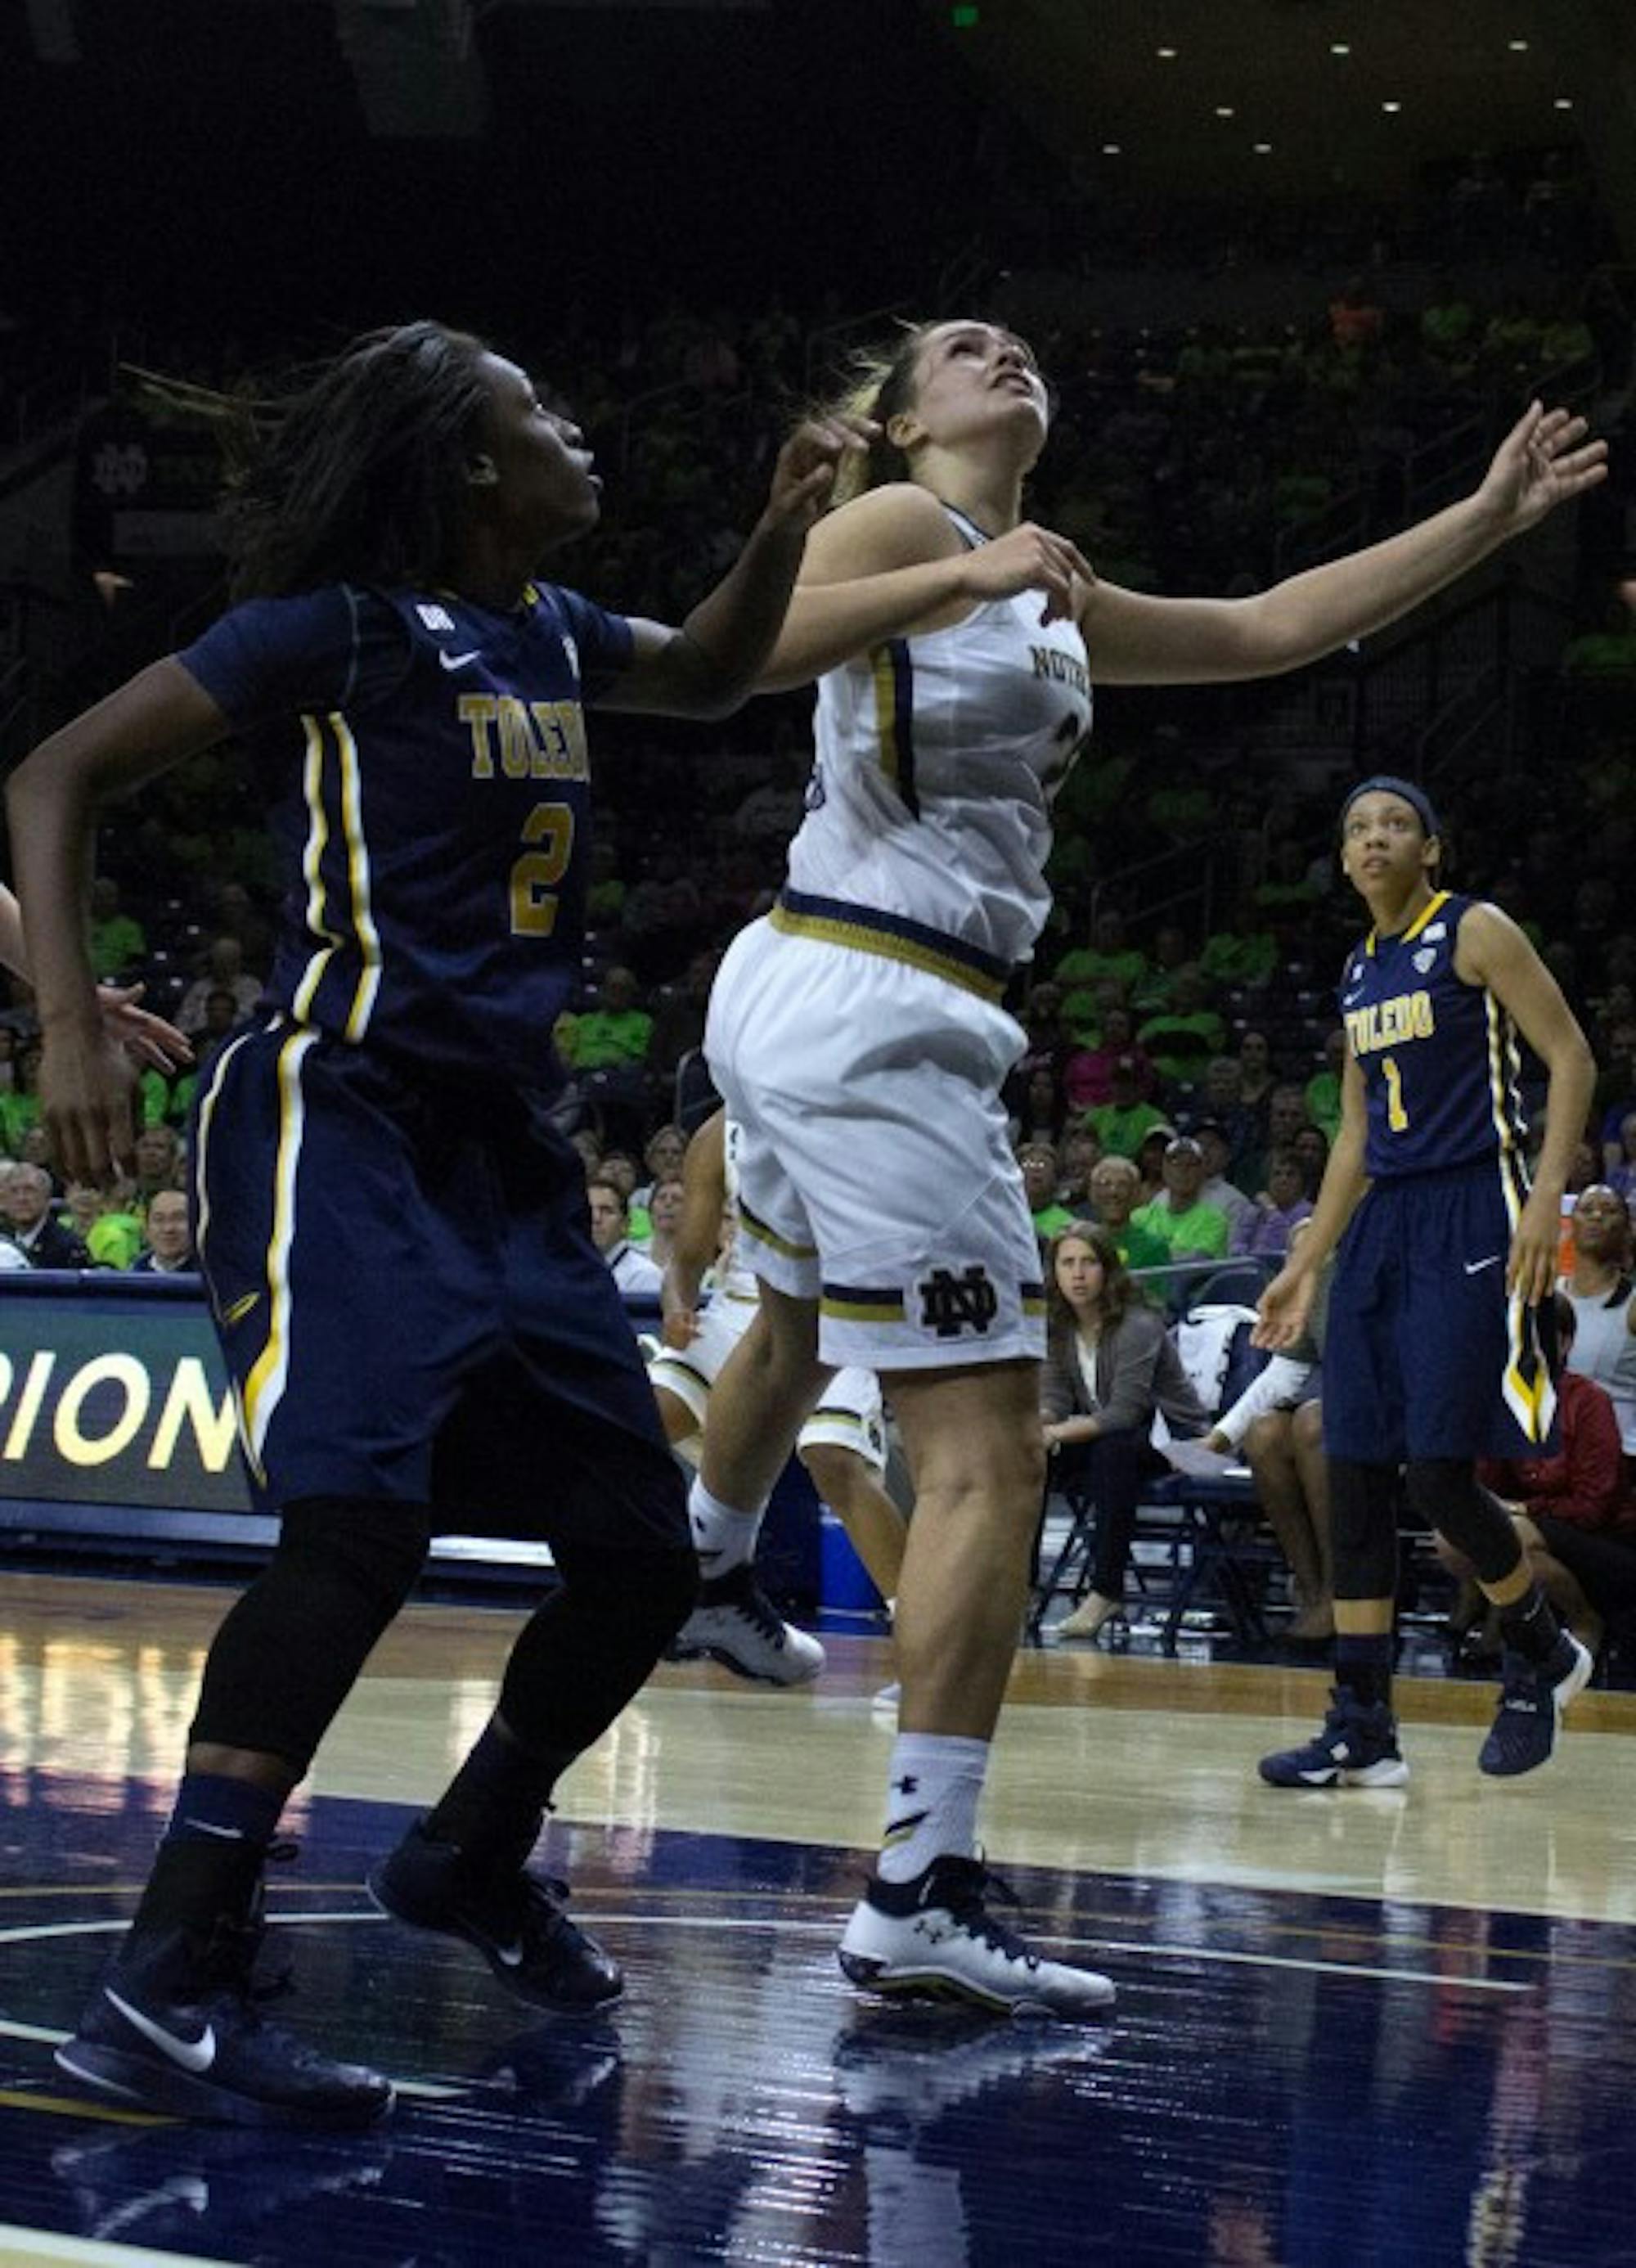 Irish sophomore forward Kathryn Westbeld jostles for position with a Toledo player during Notre Dame's 74-39 win over the Rockets on Nov. 18 at Purcell Pavilion.